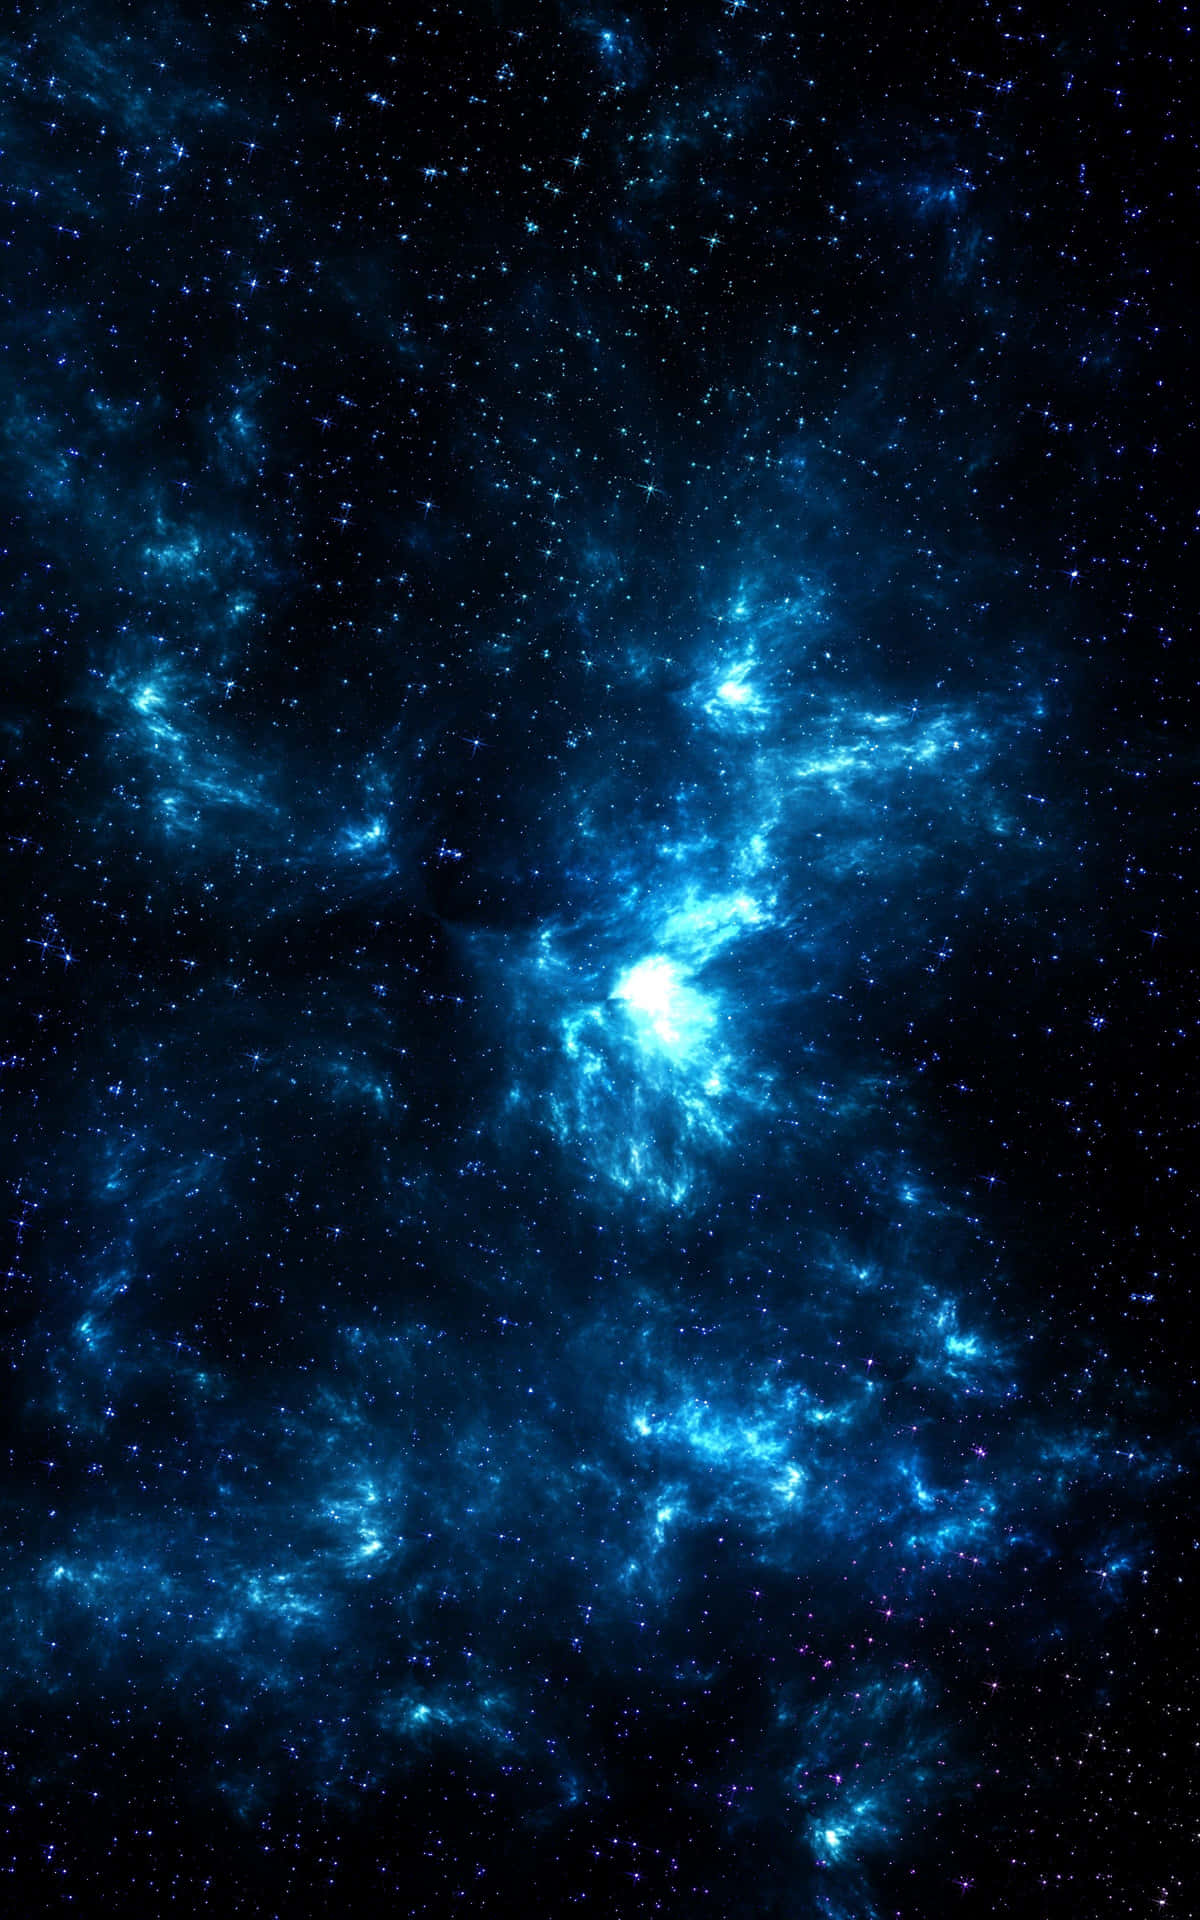 Explore The Beautiful Blue Galaxies With This Breathtaking Wallpaper Wallpaper